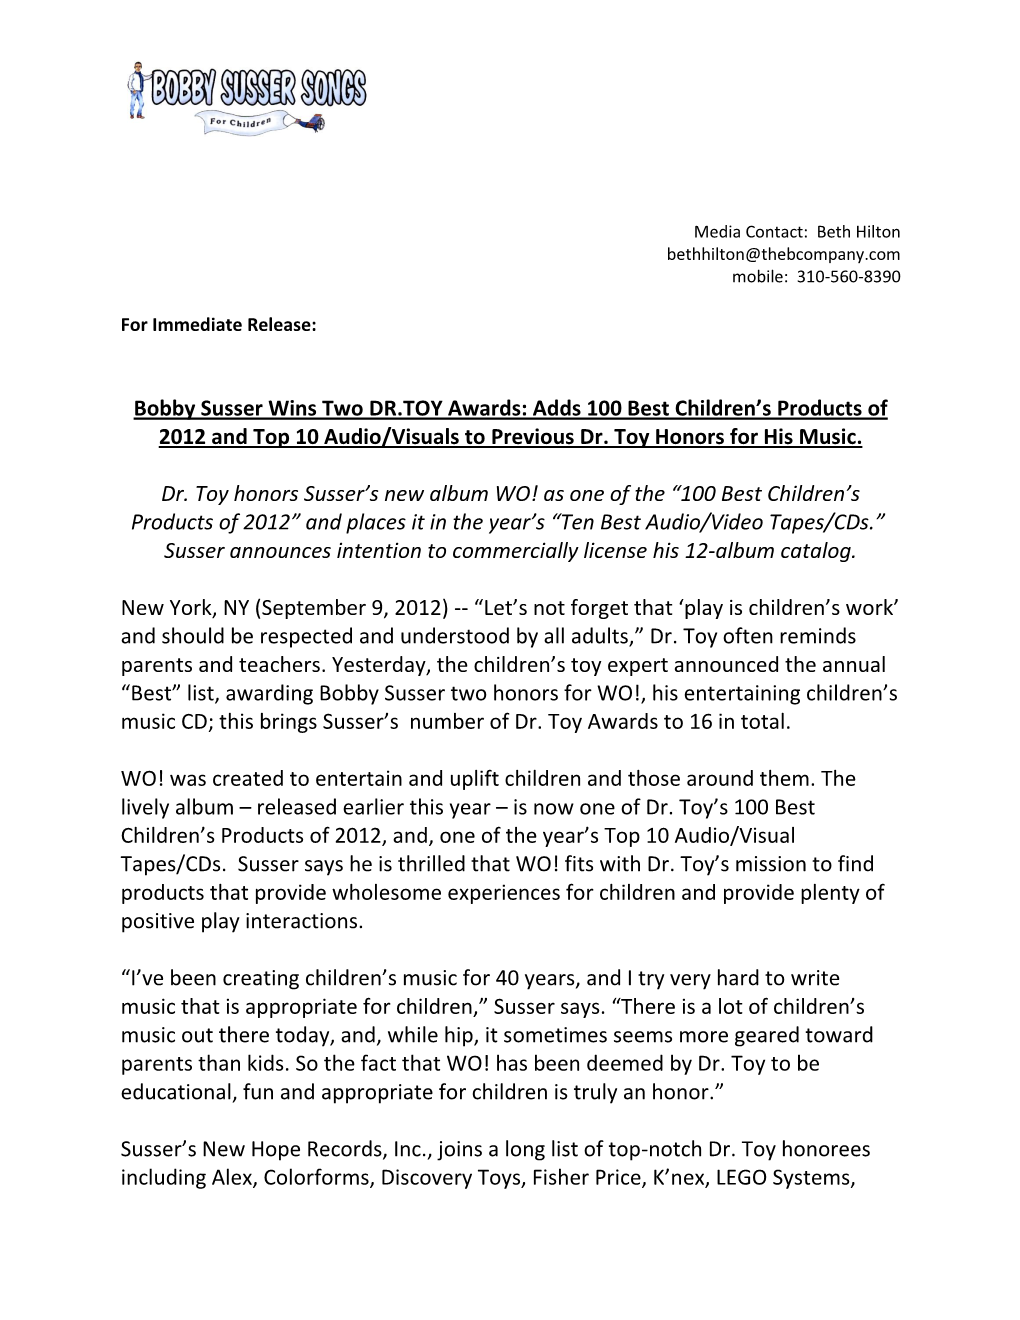 Bobby Susser Wins Two DR.TOY Awards: Adds 100 Best Children's